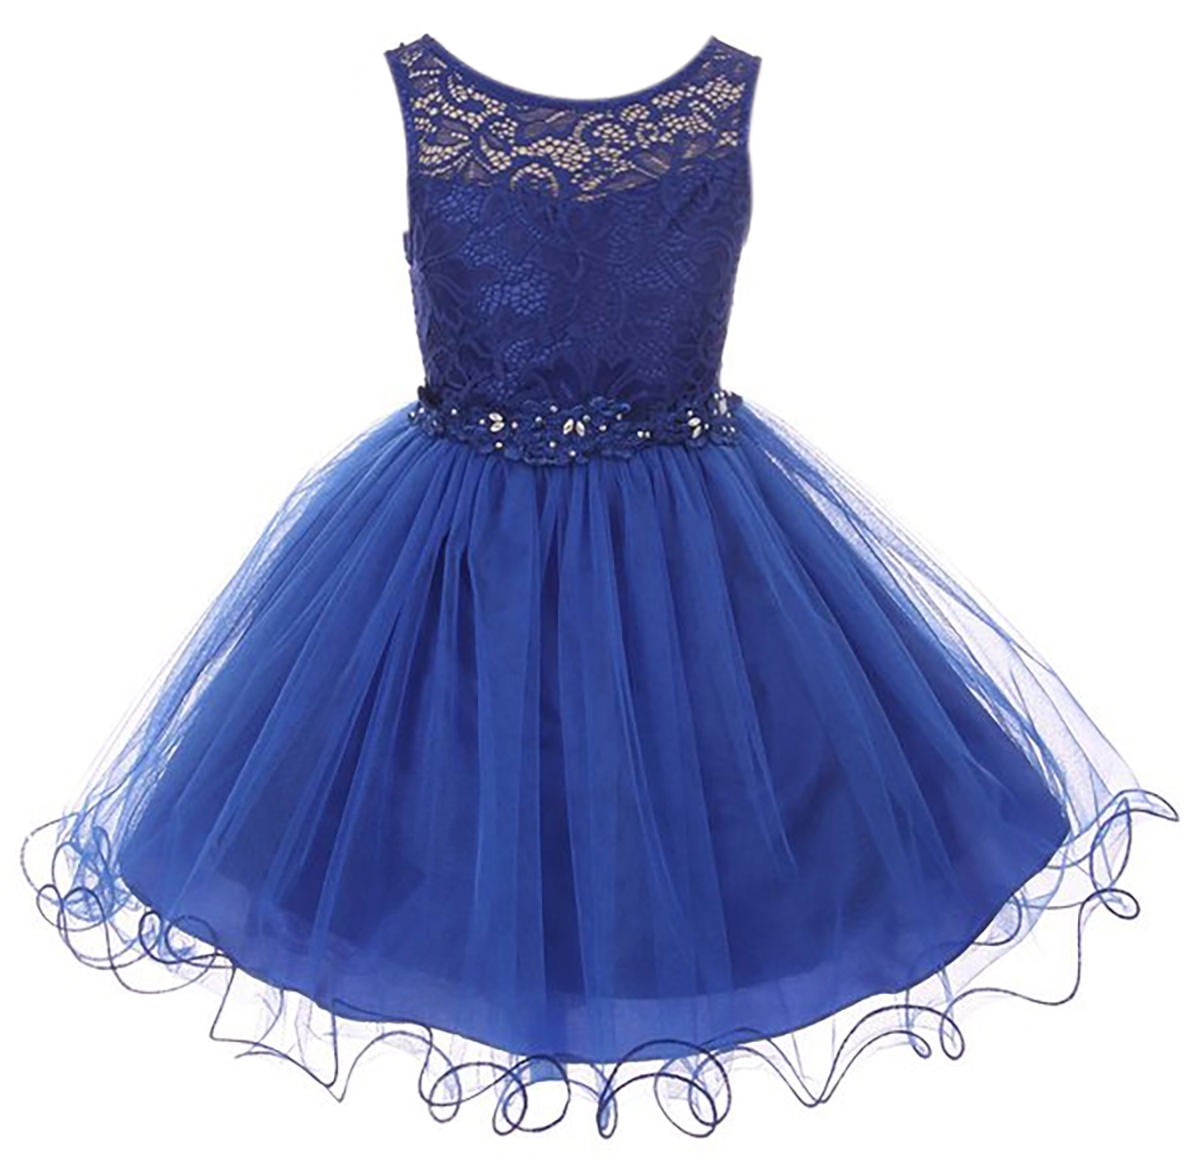 Dreamer P - Big Girls' Dress Lace Tulle Pageant Holiday Christmas Party ...